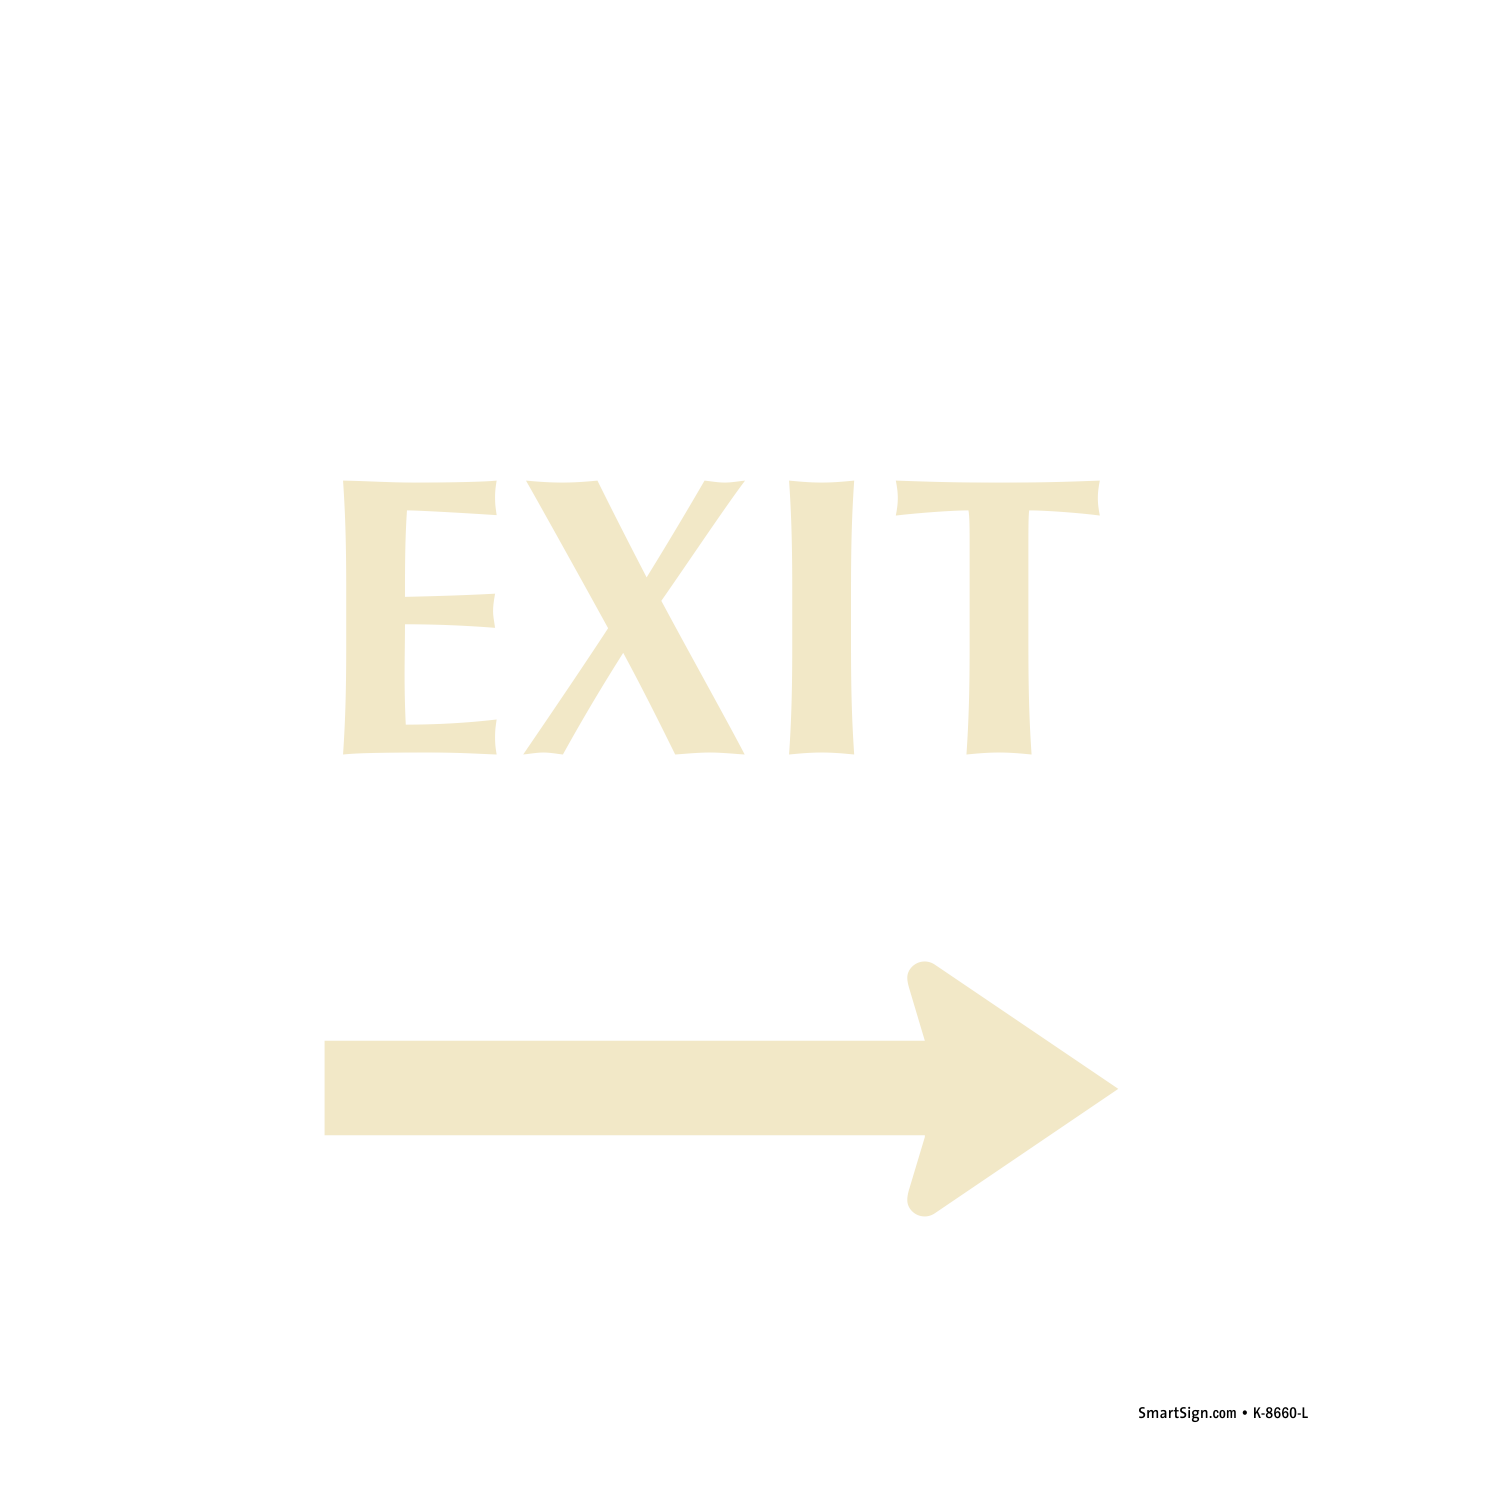 Exit with Left Arrow Sign